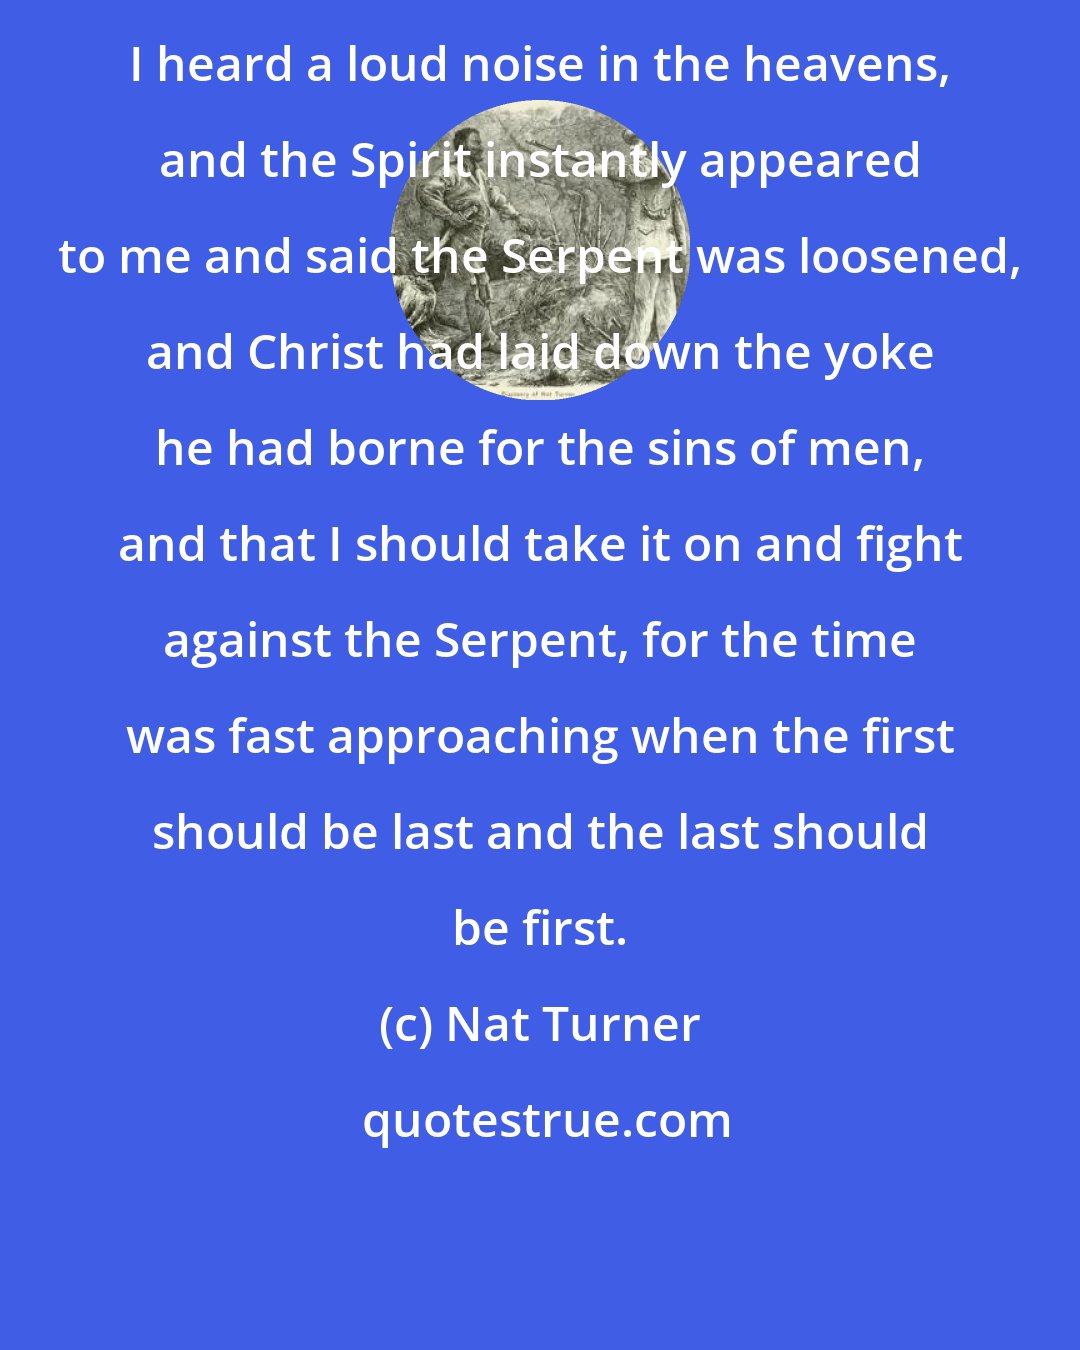 Nat Turner: I heard a loud noise in the heavens, and the Spirit instantly appeared to me and said the Serpent was loosened, and Christ had laid down the yoke he had borne for the sins of men, and that I should take it on and fight against the Serpent, for the time was fast approaching when the first should be last and the last should be first.